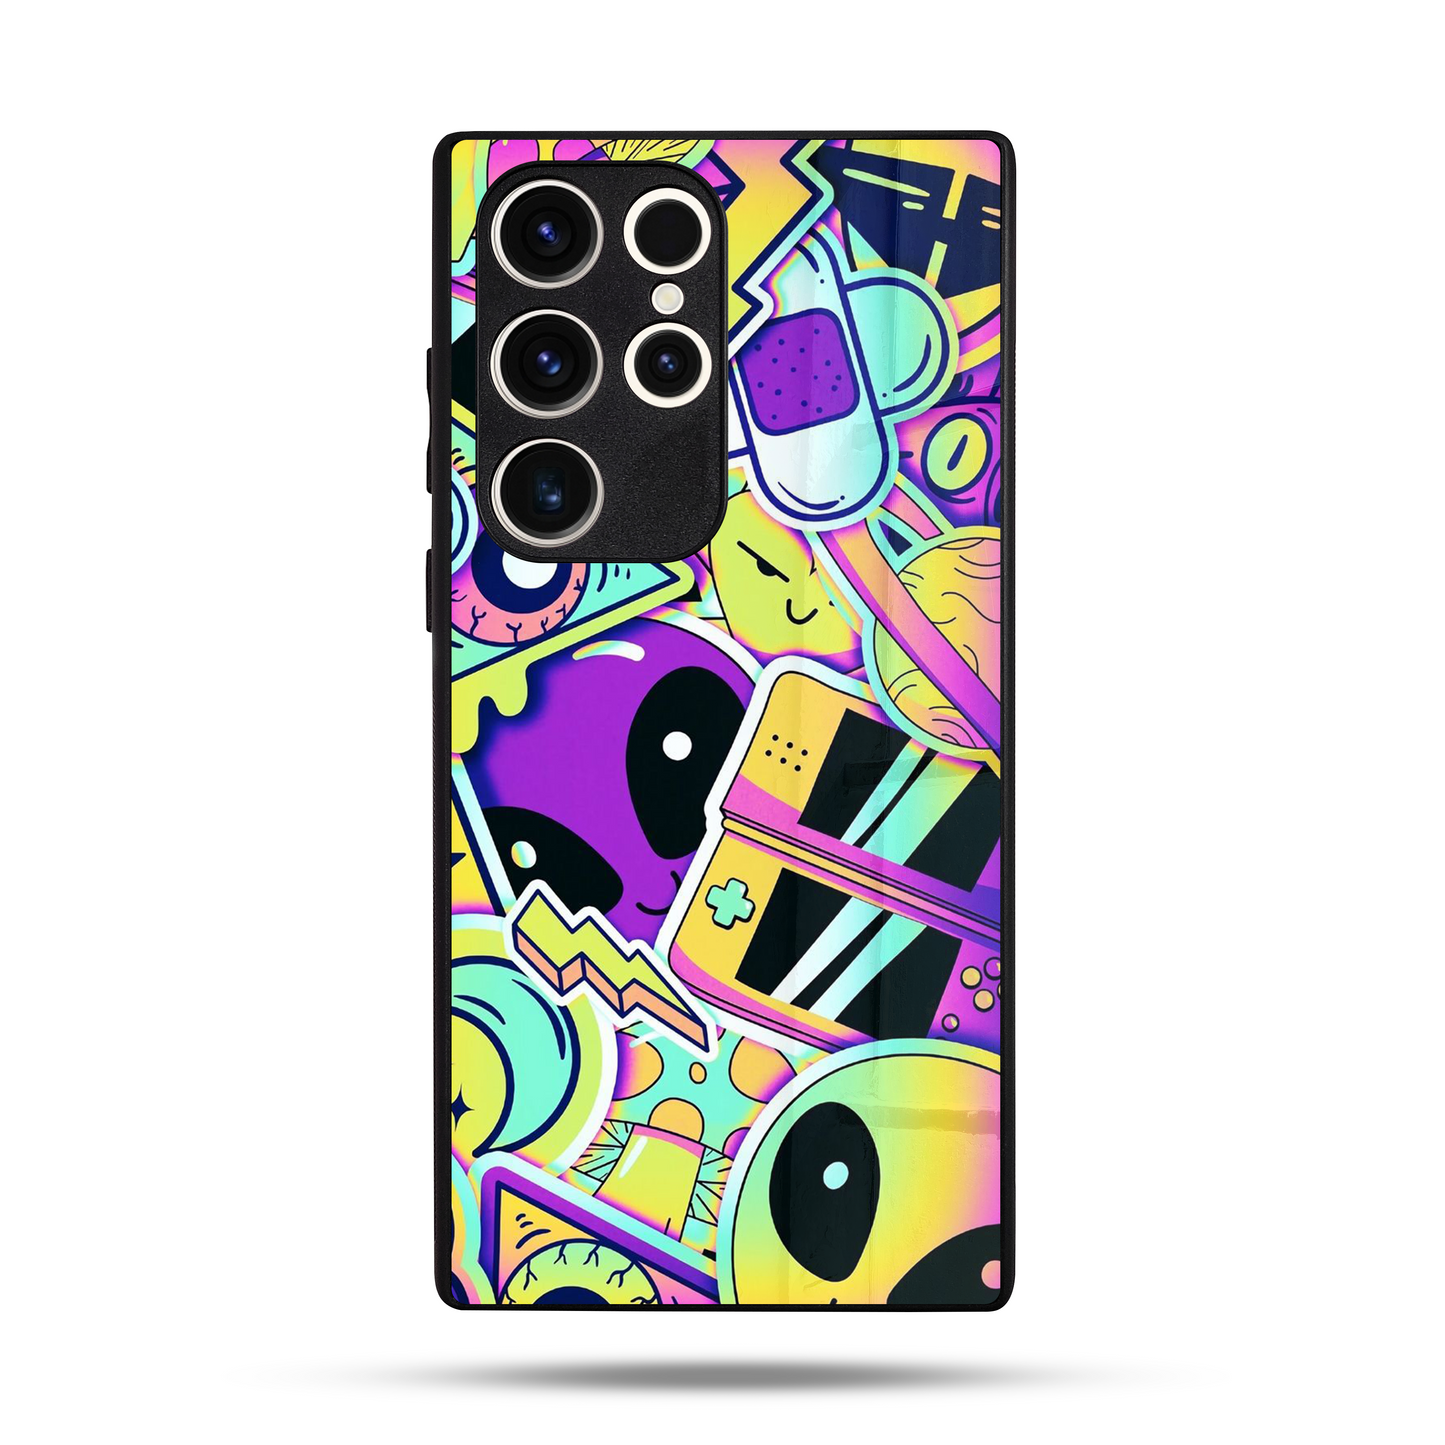 Spaced Out SuperGlass Case Cover